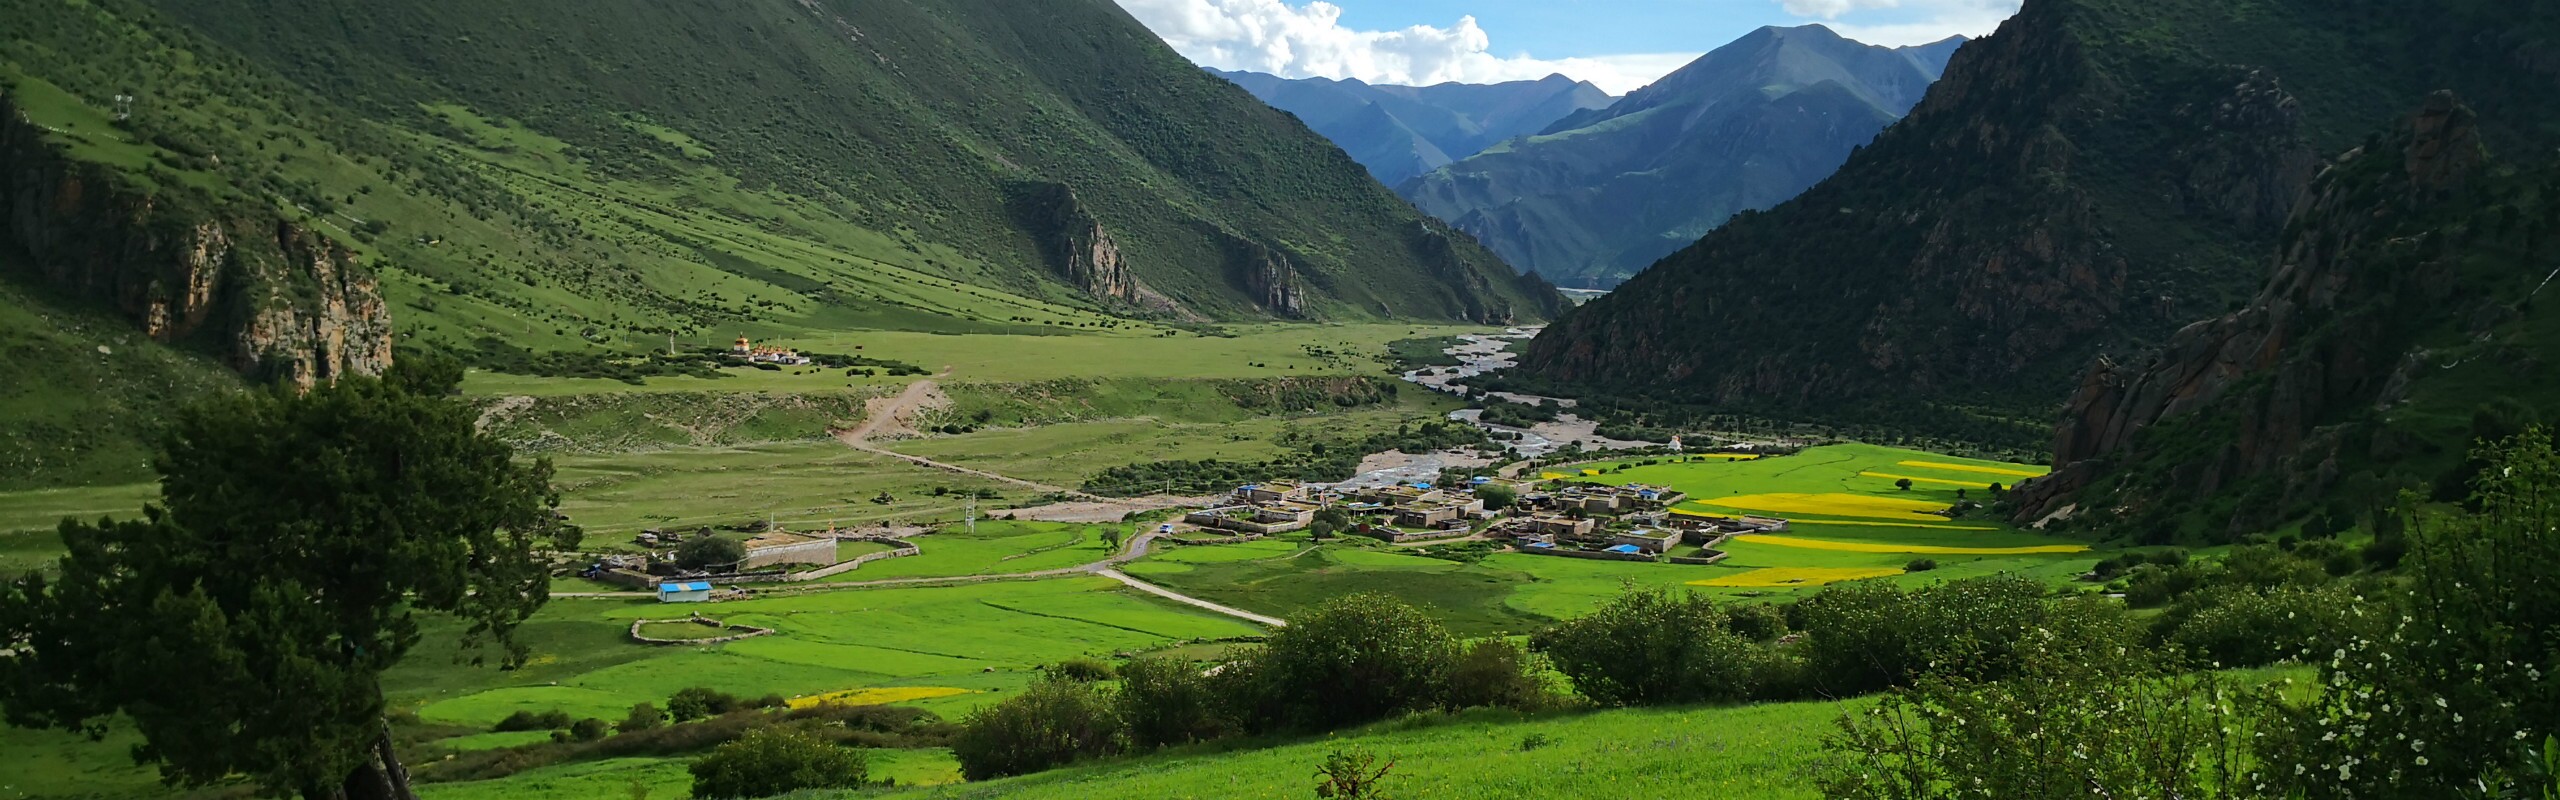 7-Day Tibet Tour including Trekking and Camping